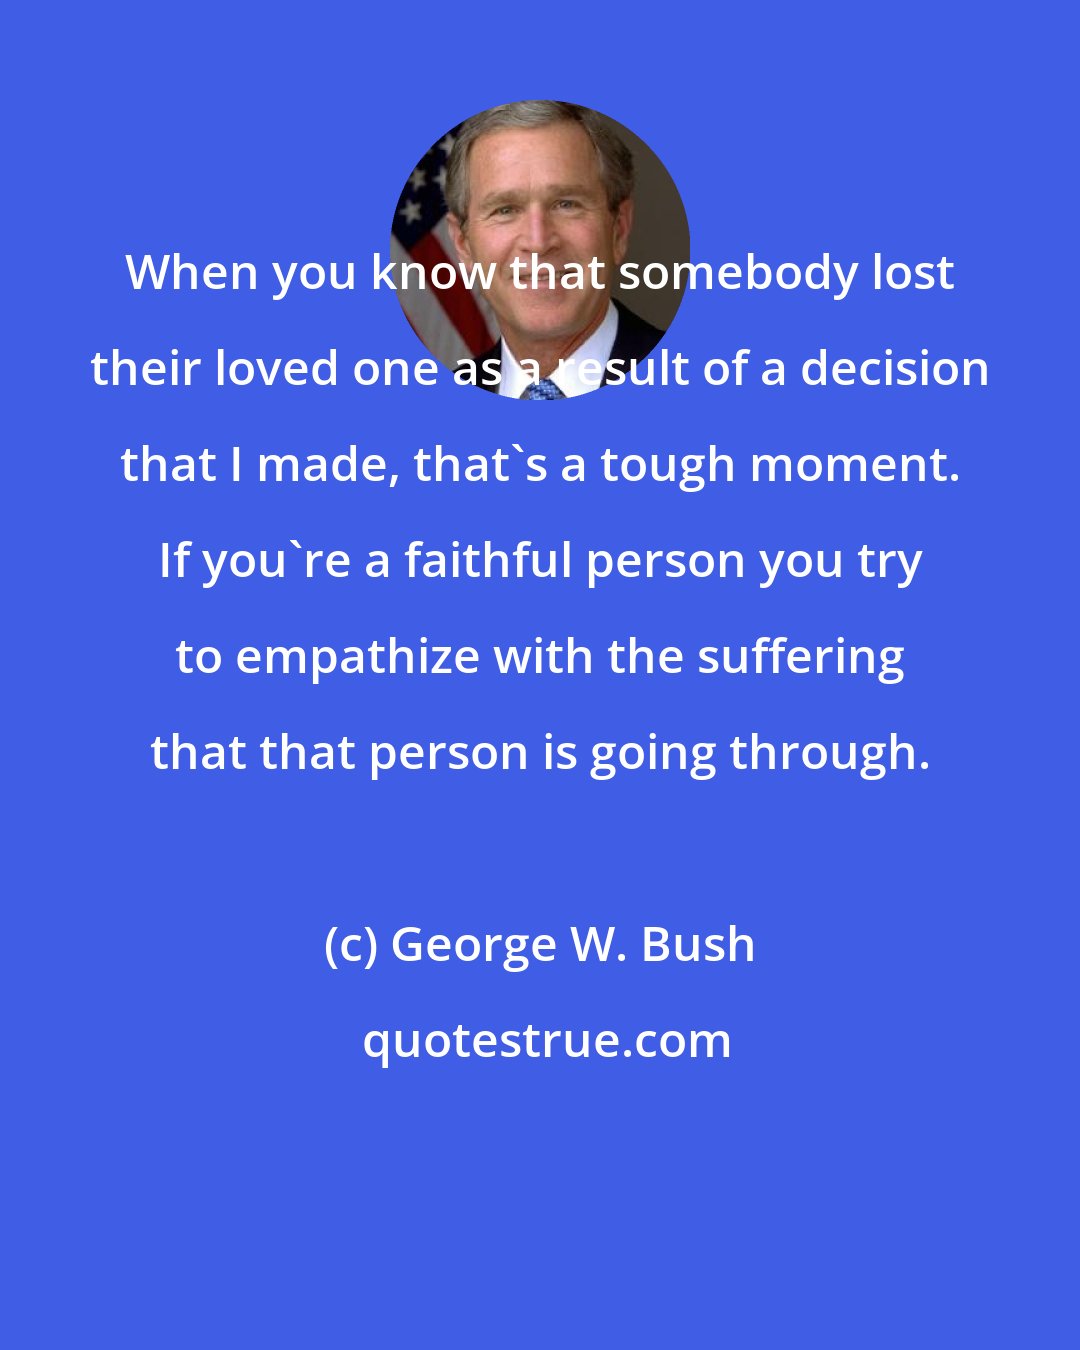 George W. Bush: When you know that somebody lost their loved one as a result of a decision that I made, that's a tough moment. If you're a faithful person you try to empathize with the suffering that that person is going through.